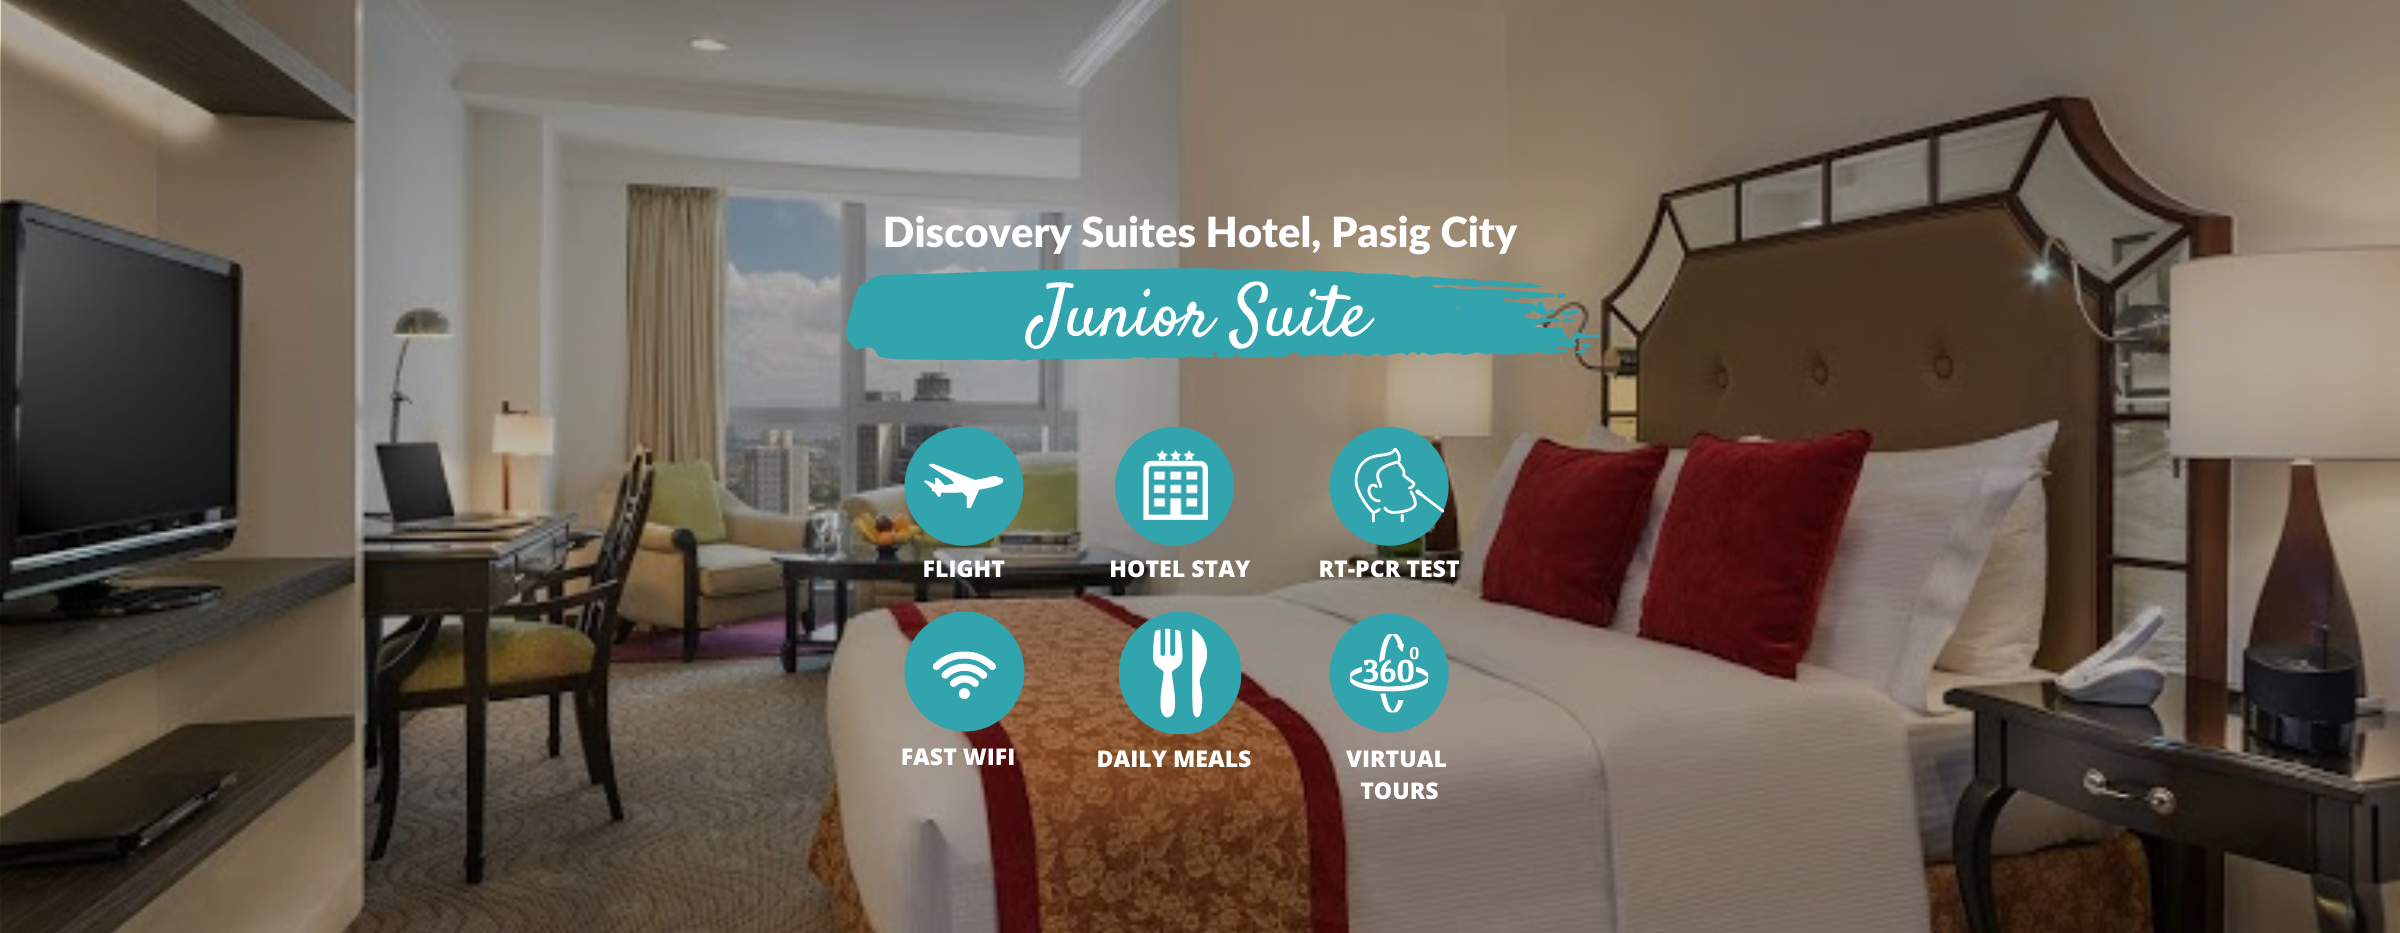 Manila Quarantine from SFO at Discovery Suites with Philippine Airlines, Meals & Virtual Tours